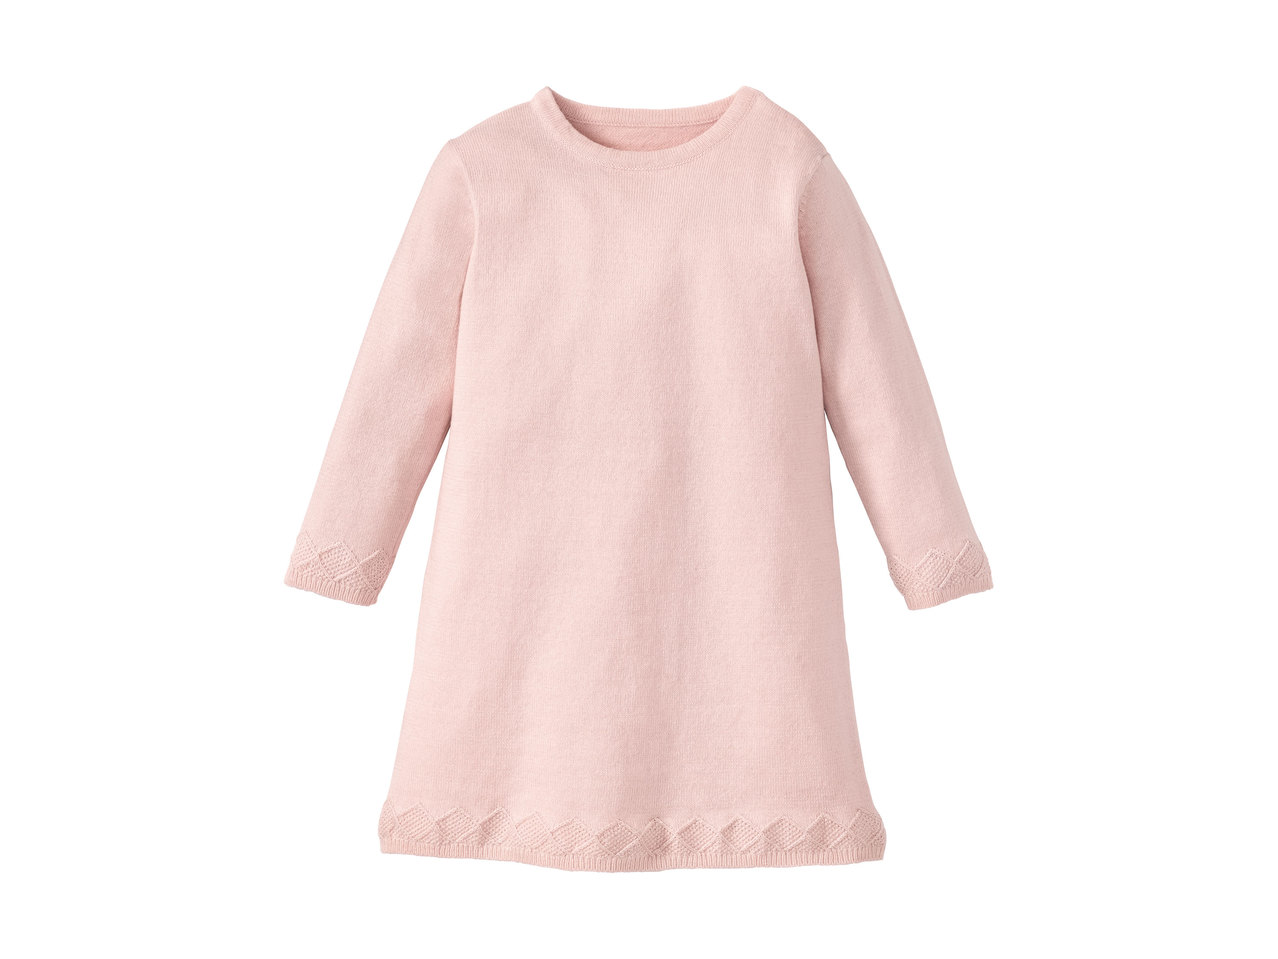 Lupilu Baby Girl's Knitted Dress1